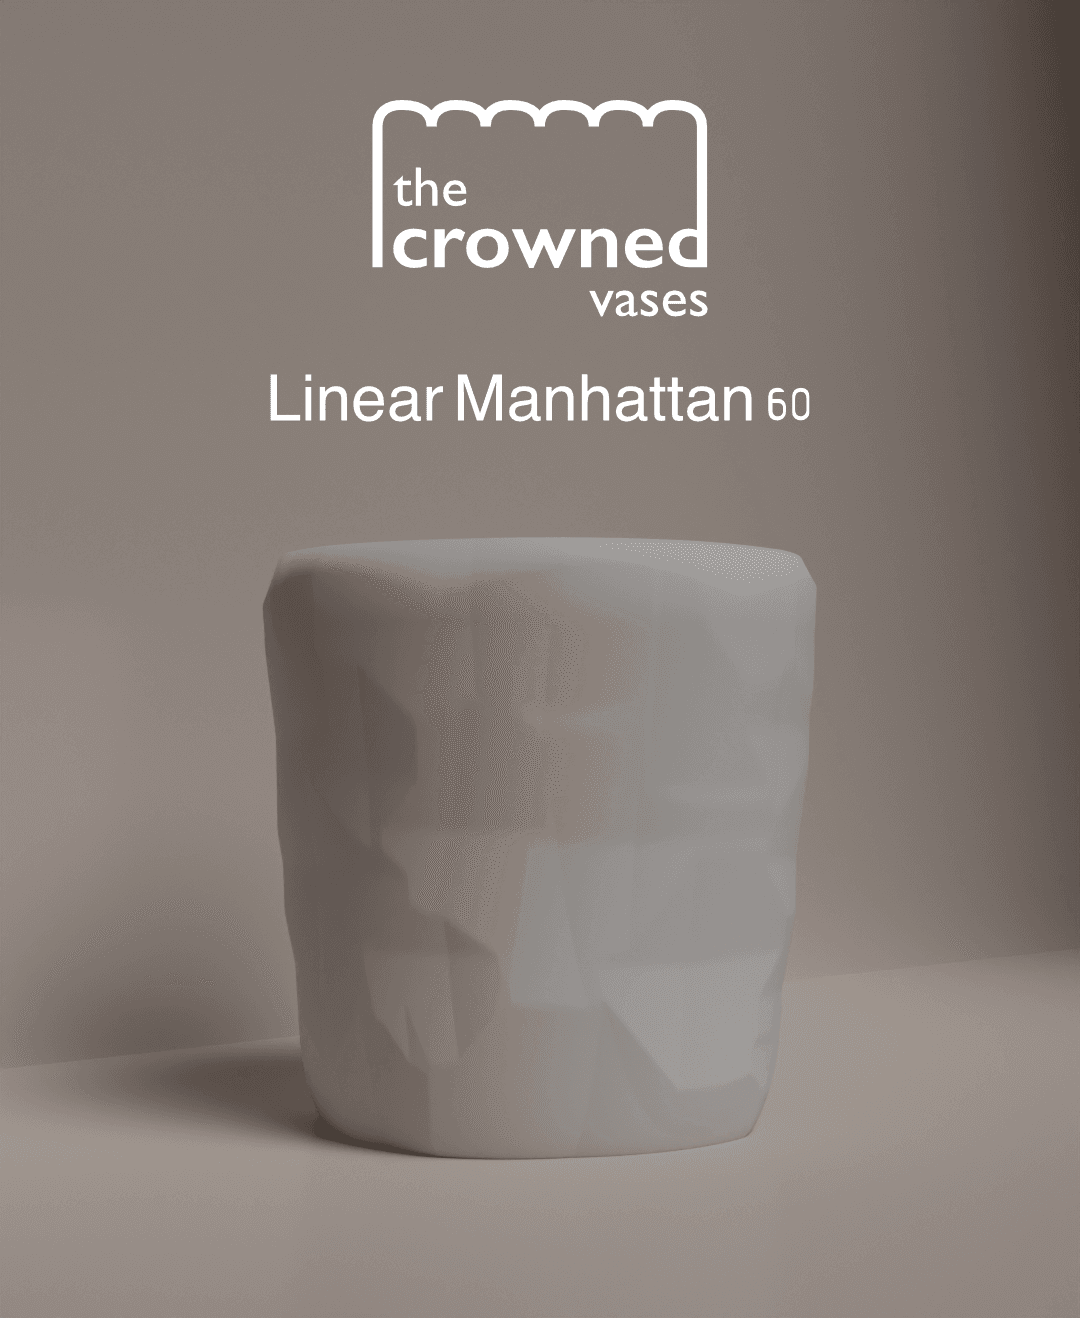 The Crowned Vases - Linear Manhattan 60 3d model